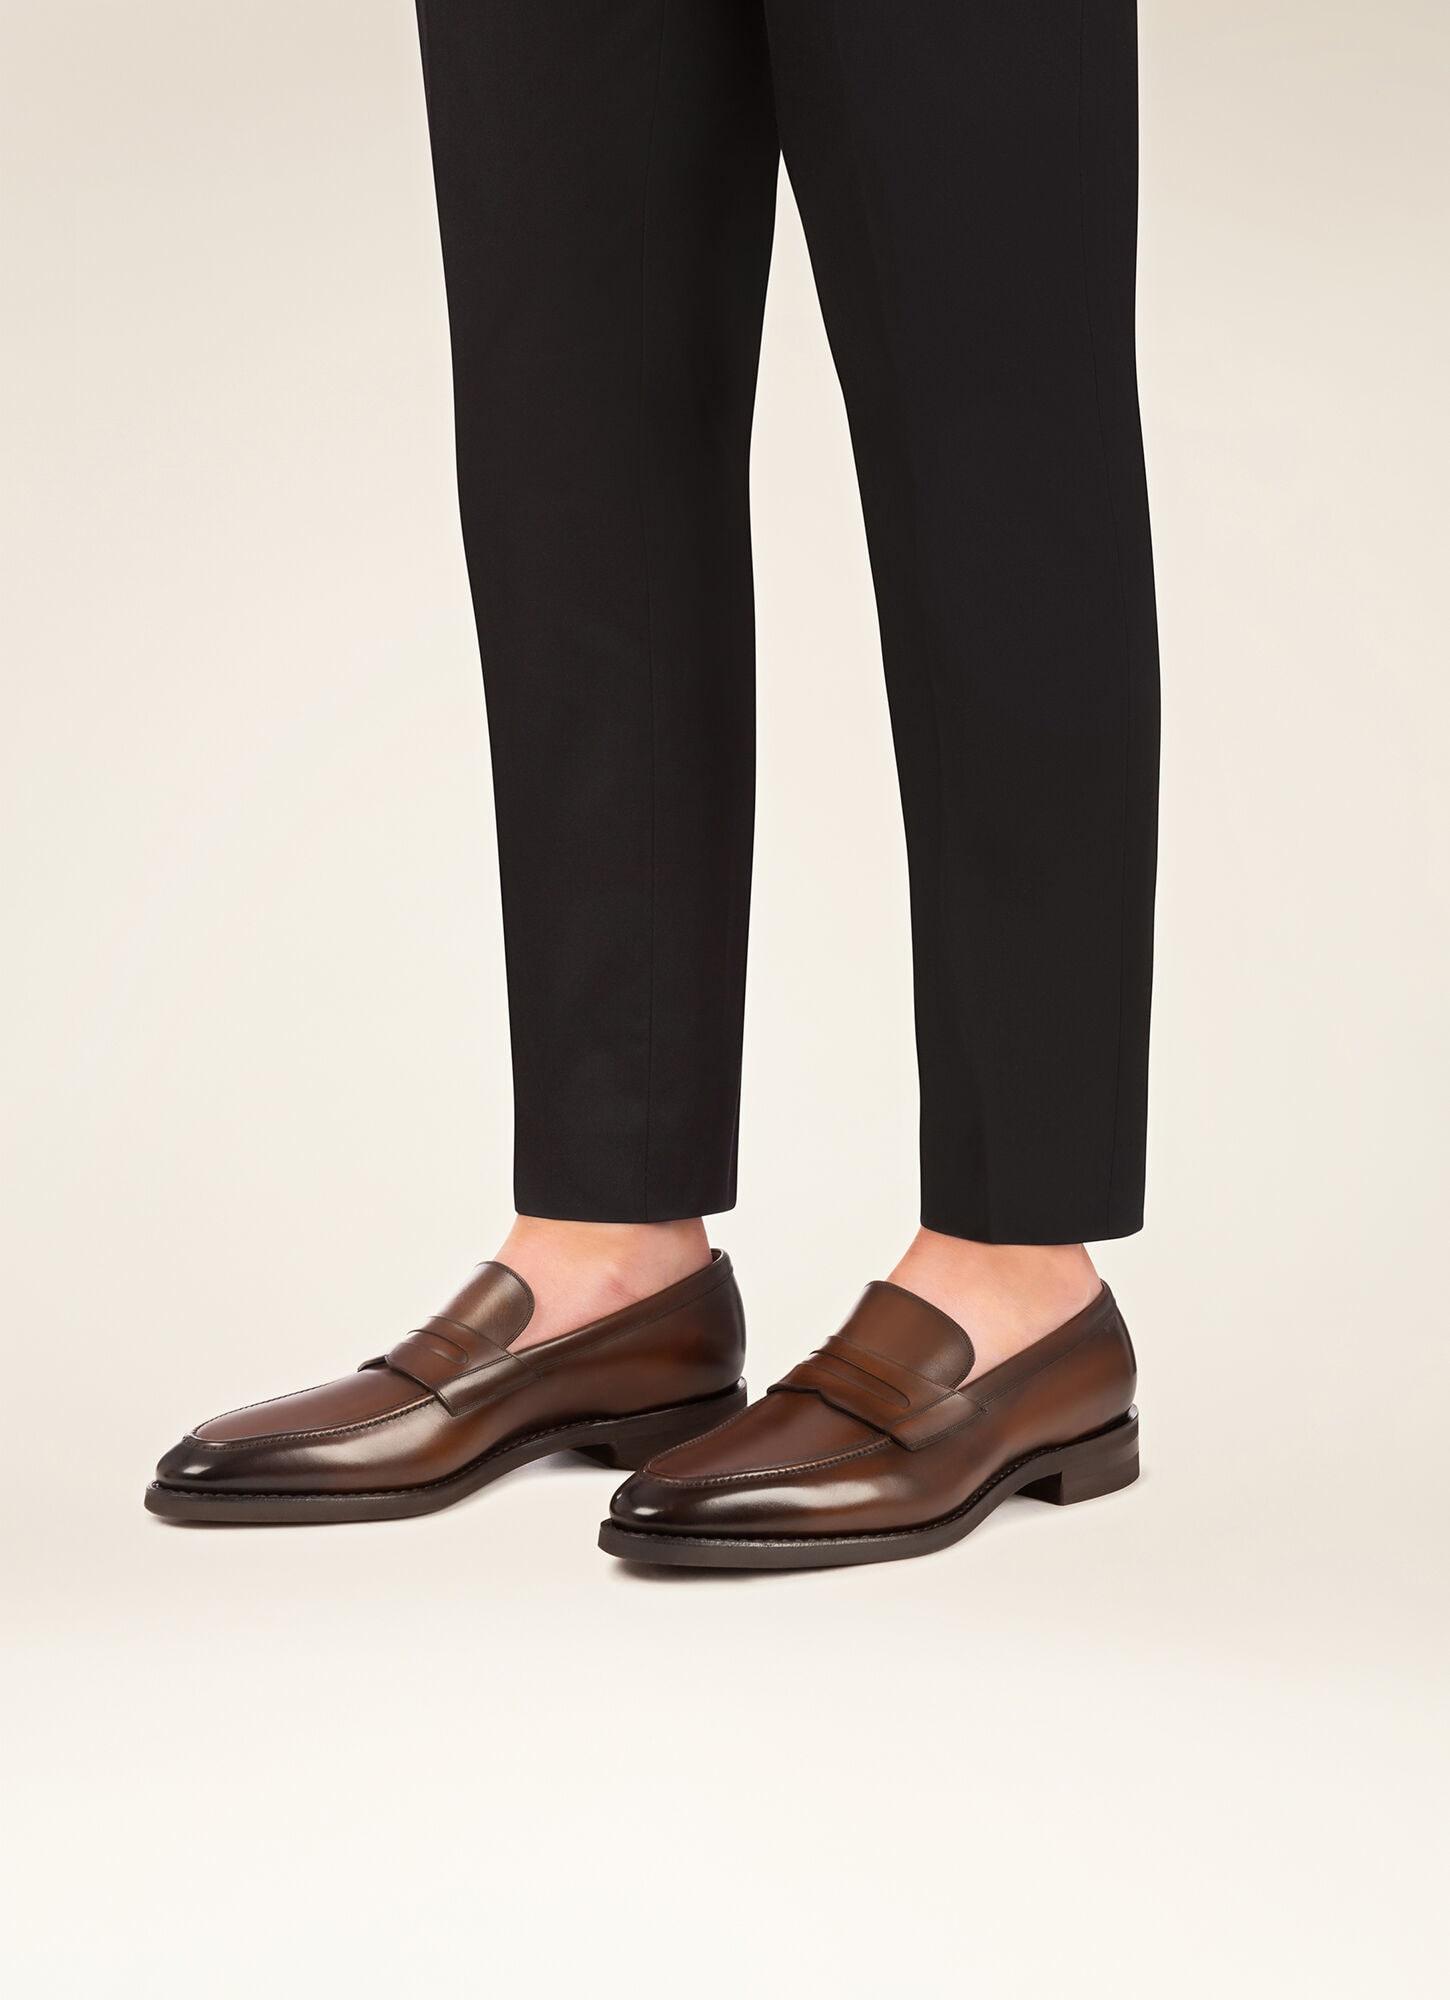 Bally Leather Score in Brown for Men - Lyst